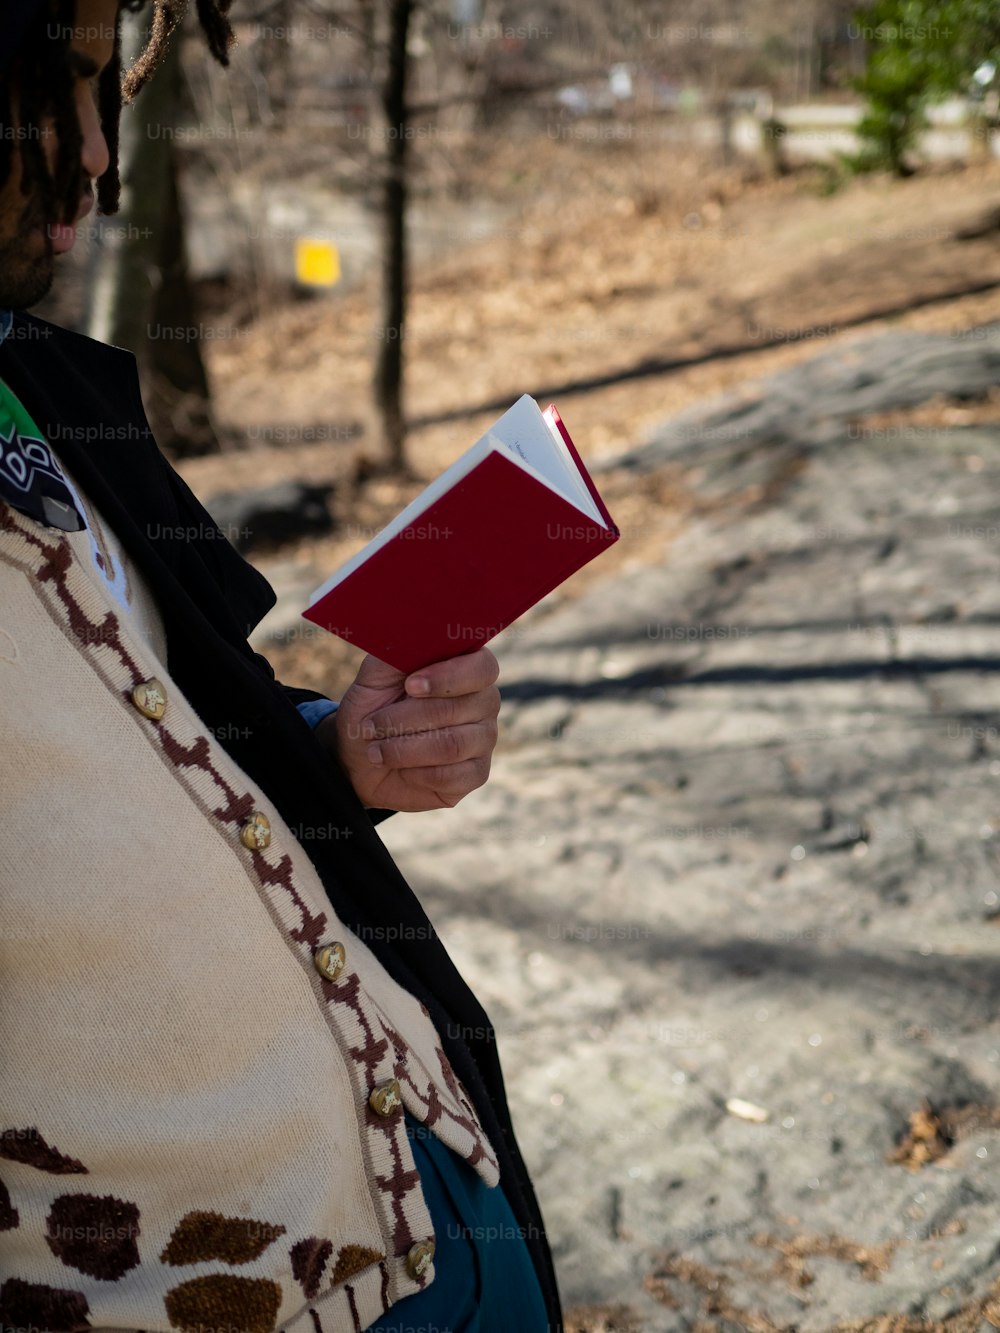 a woman holding a red book in her hands